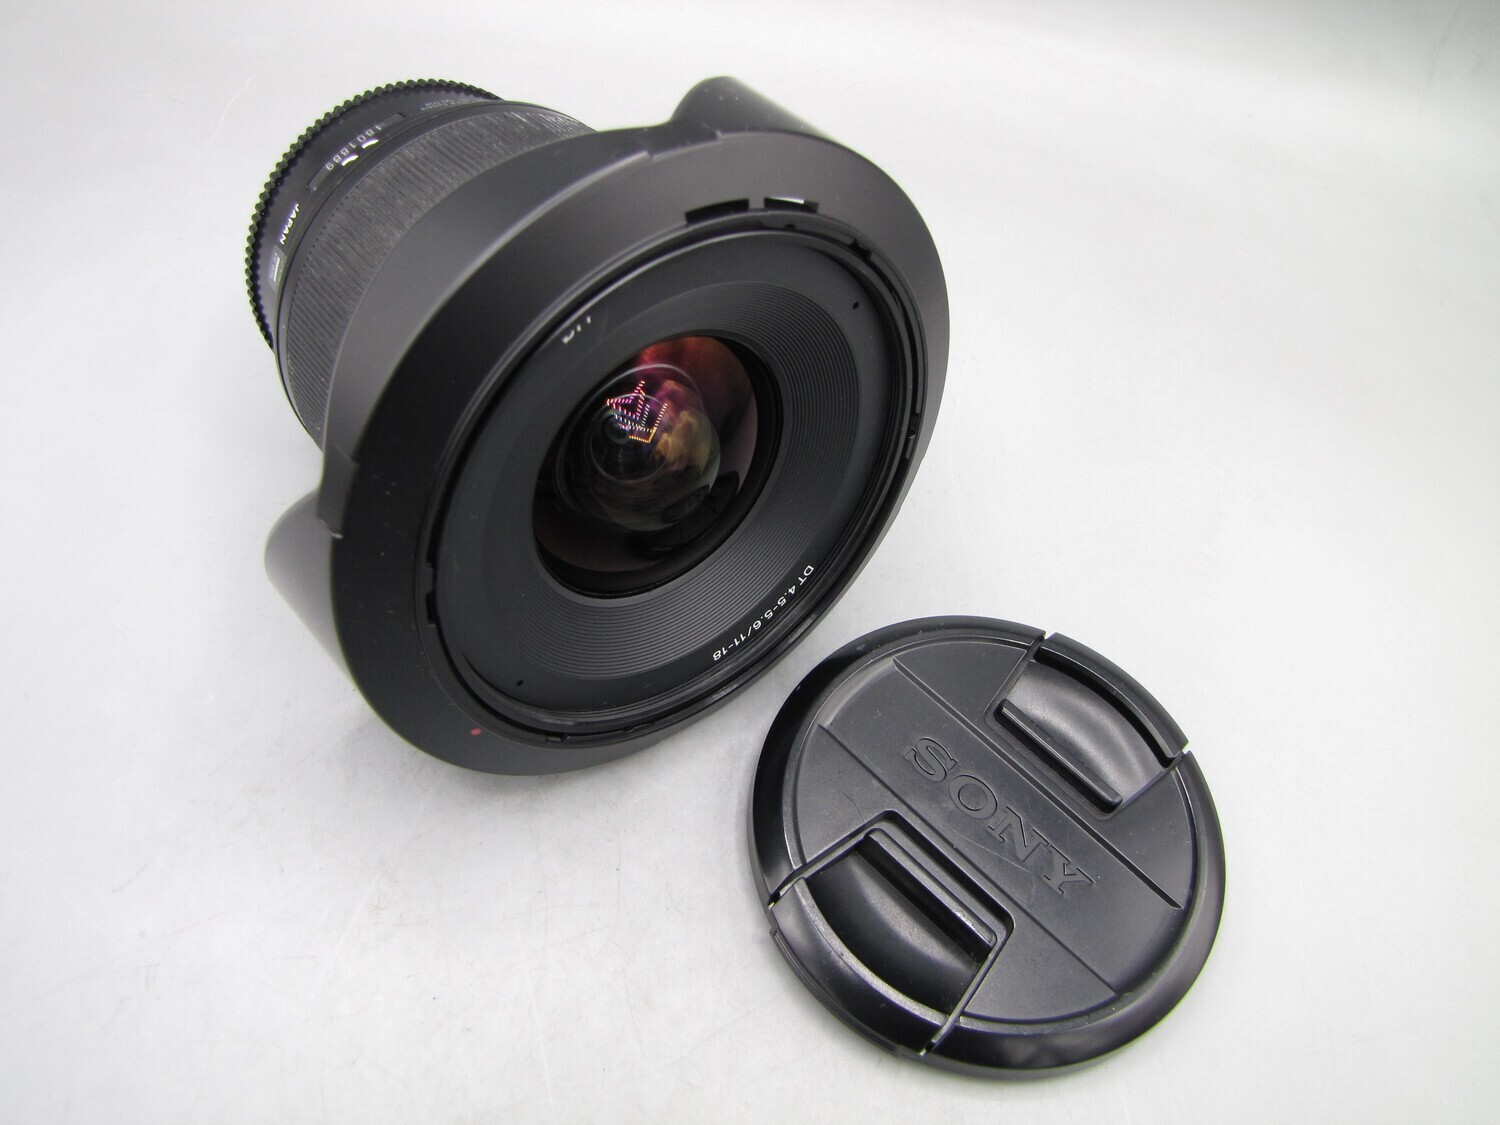 Sony DT A-mount 4.5-5.6 11-18 Lens EXC+++